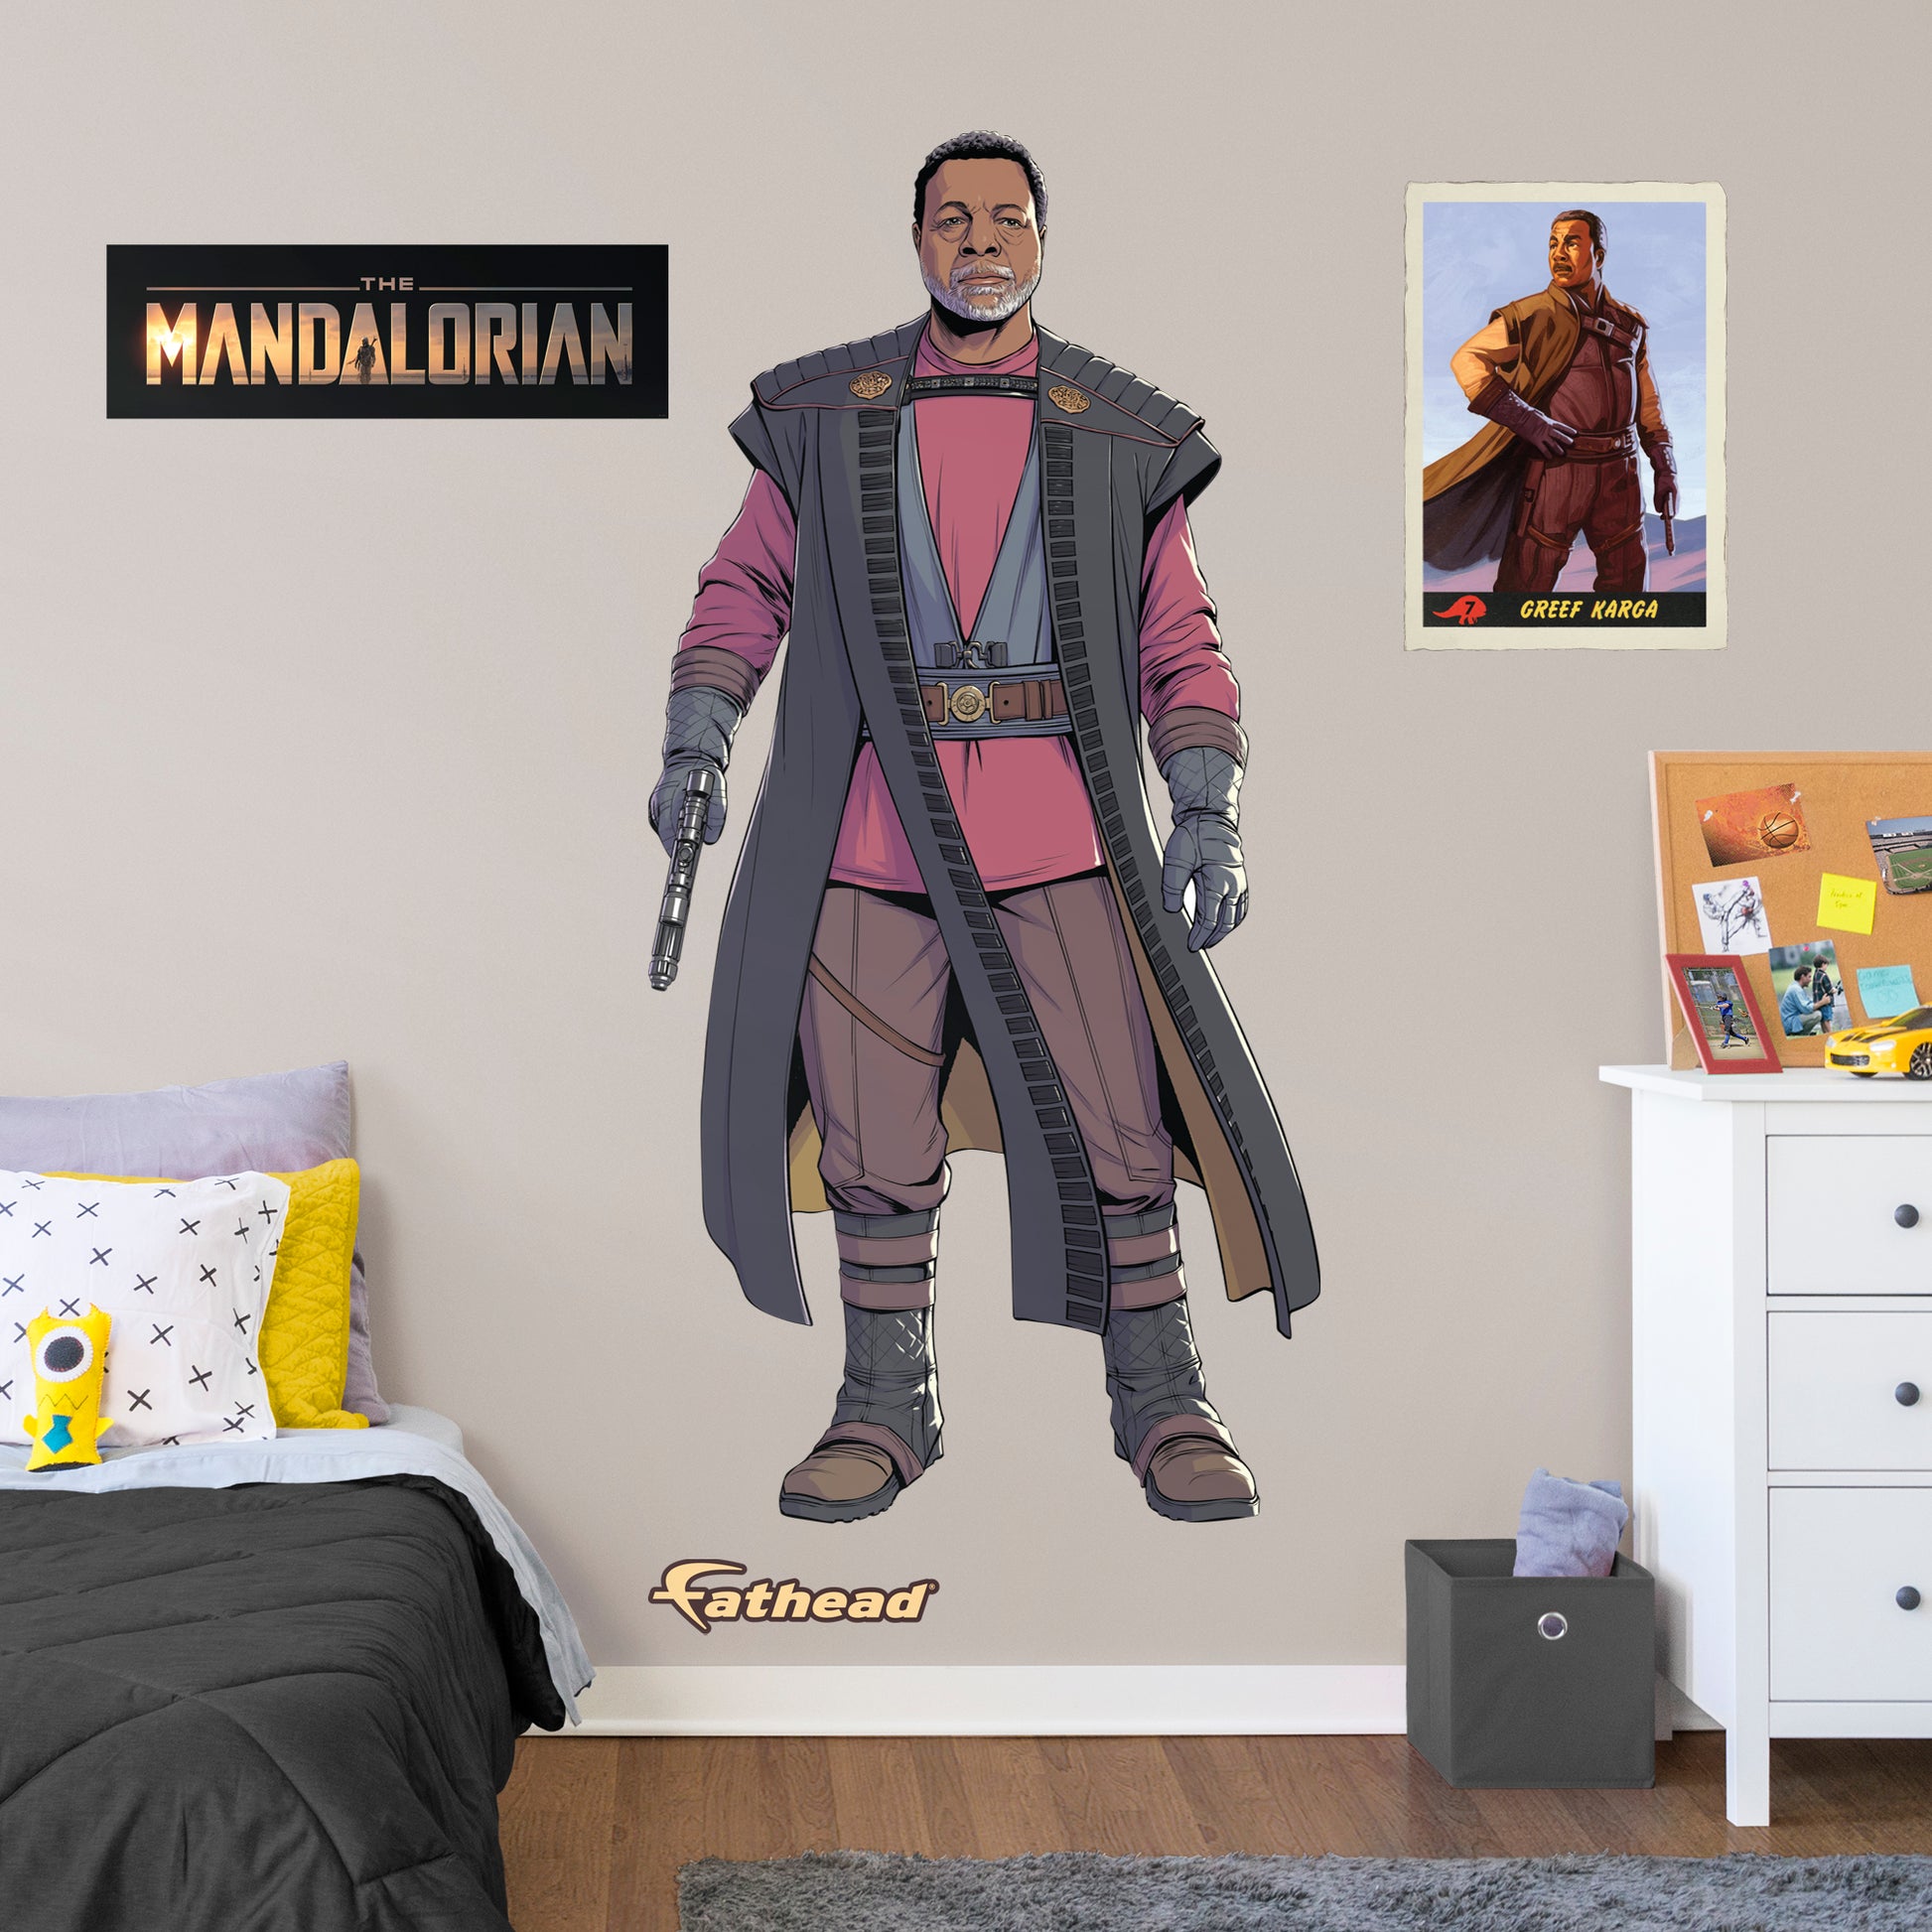 Life-Size Character +3 Decals (38"W x 78"H)